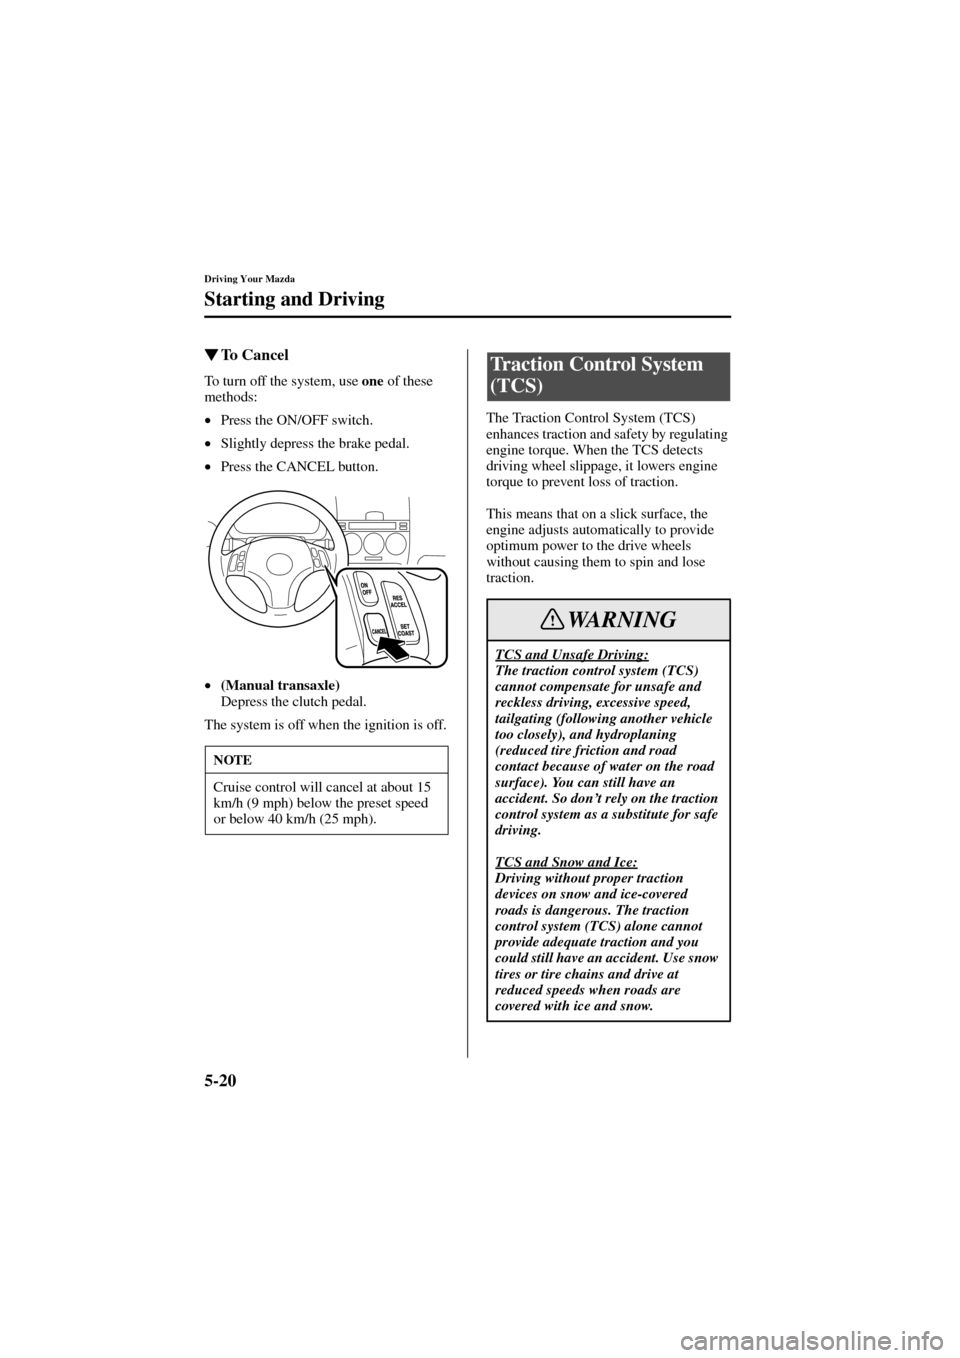 MAZDA MODEL 6 2004  Owners Manual (in English) 5-20
Driving Your Mazda
Starting and Driving
Form No. 8R29-EA-02I
To  C a n c e l
To turn off the system, use one
 of these 
methods:
•
Press the ON/OFF switch.
•
Slightly depress the brake pedal